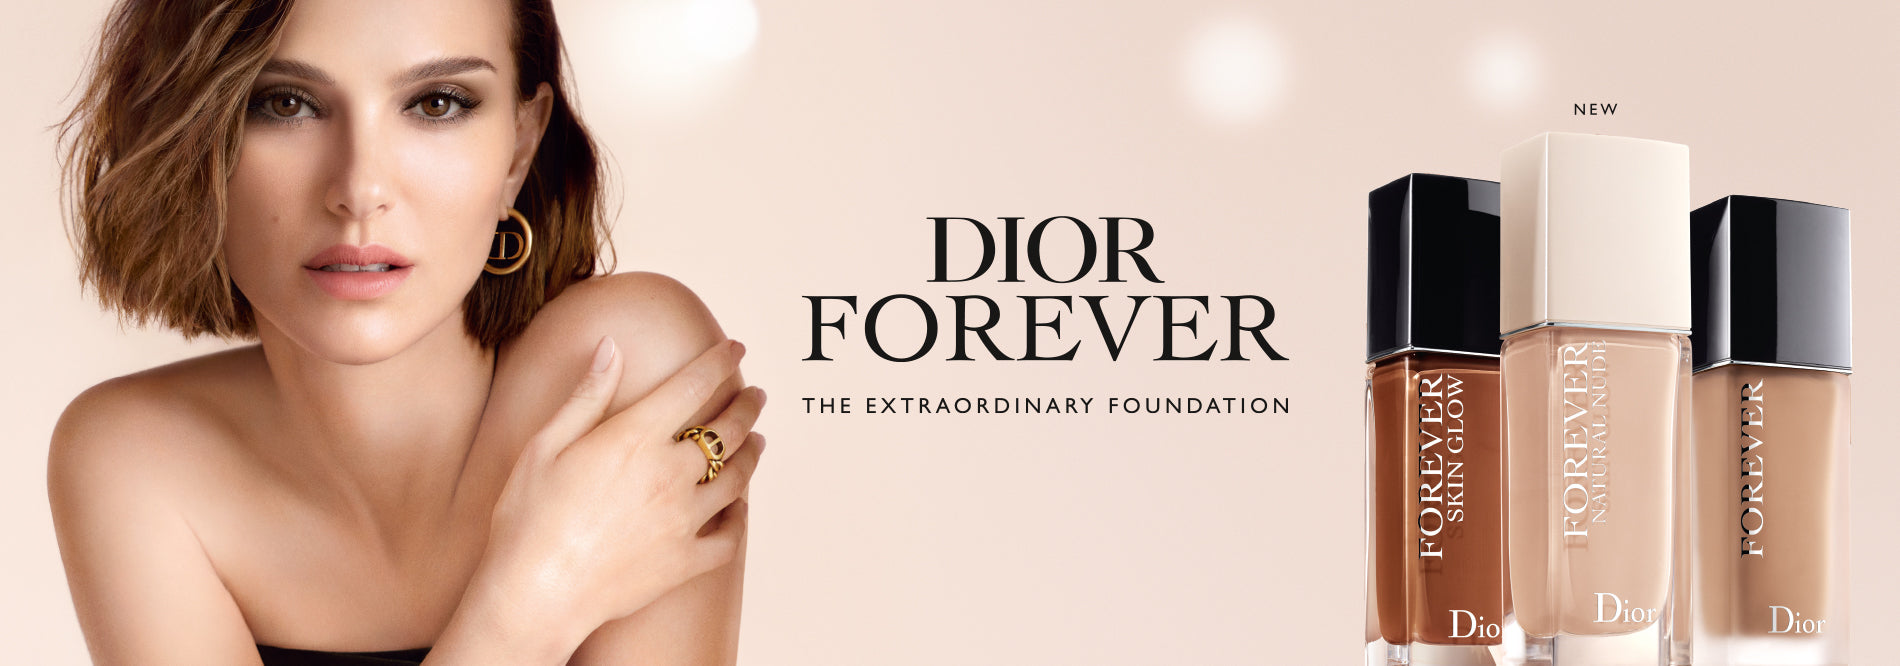 dior cosmetics south africa